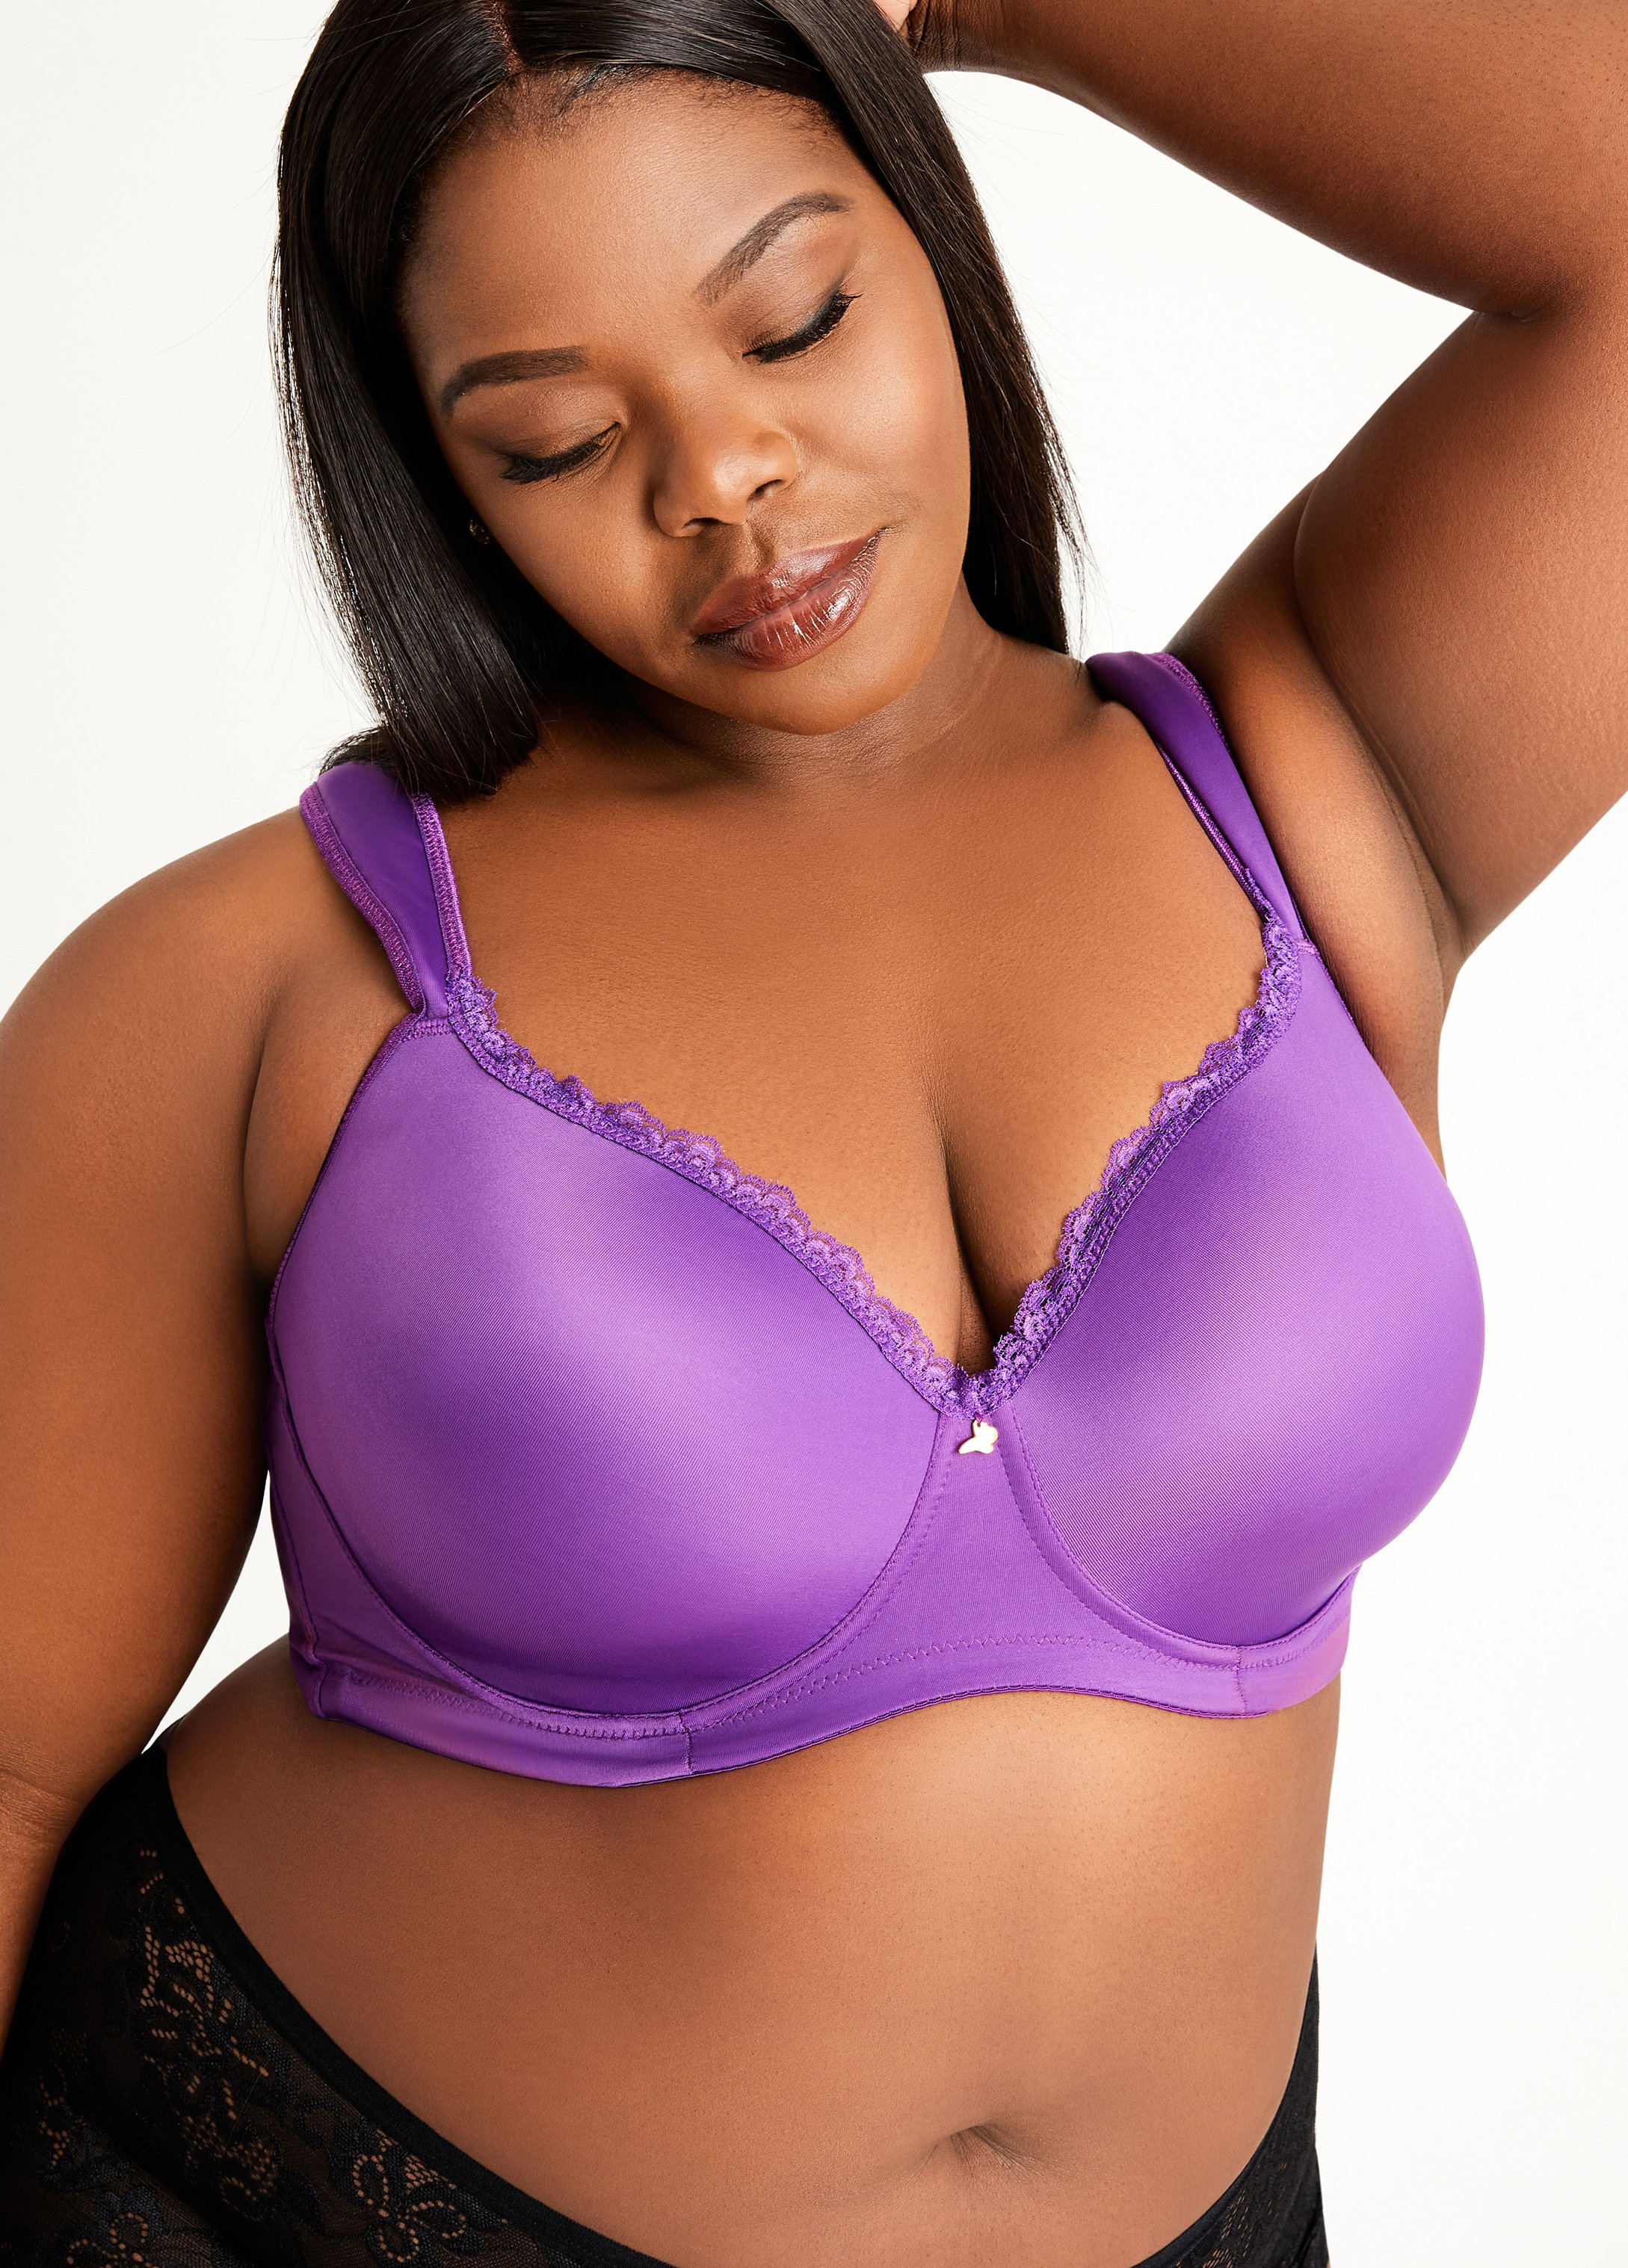 TOWED22 Plus Size Bras For Women,Women's Bra Plus Size Unlined Full  Coverage Smooth Underwire Support Purple,42E 